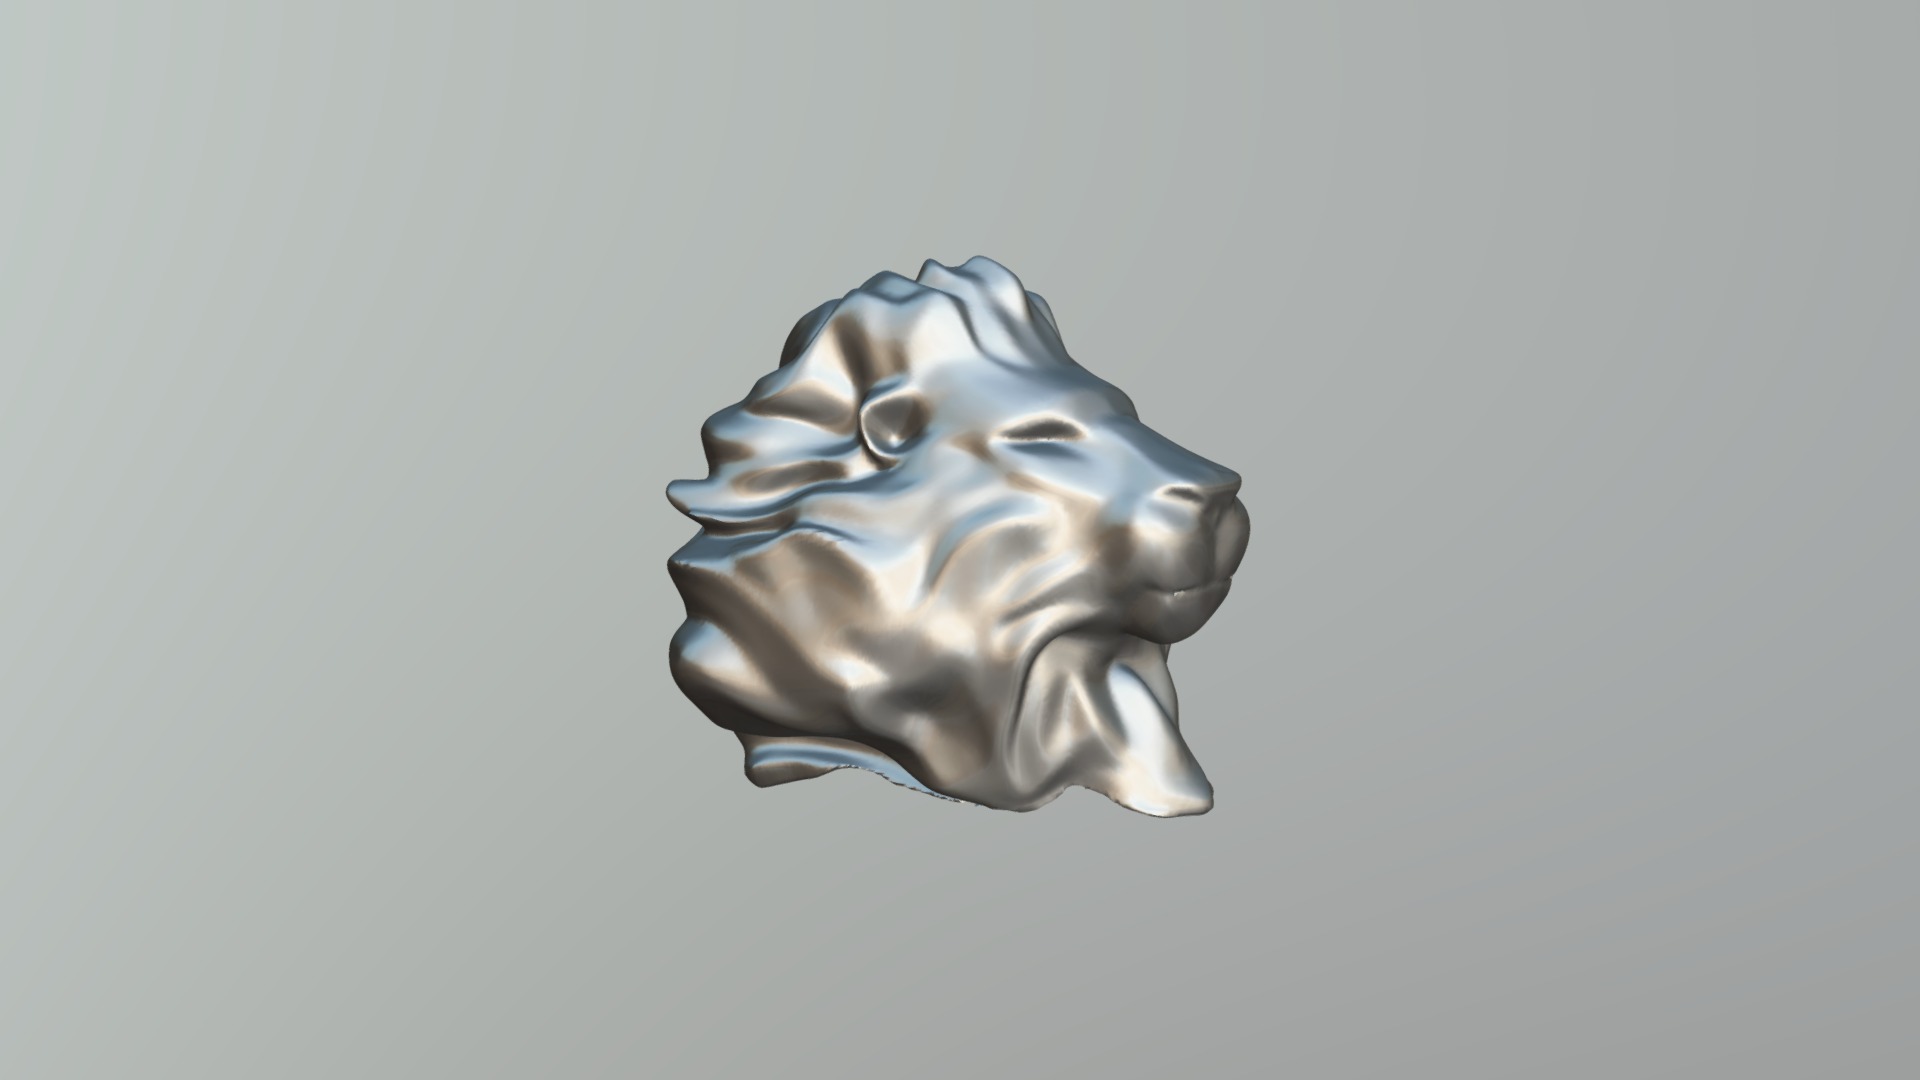 3D model Lion head bust statue - This is a 3D model of the Lion head bust statue. The 3D model is about a fish with a human face.